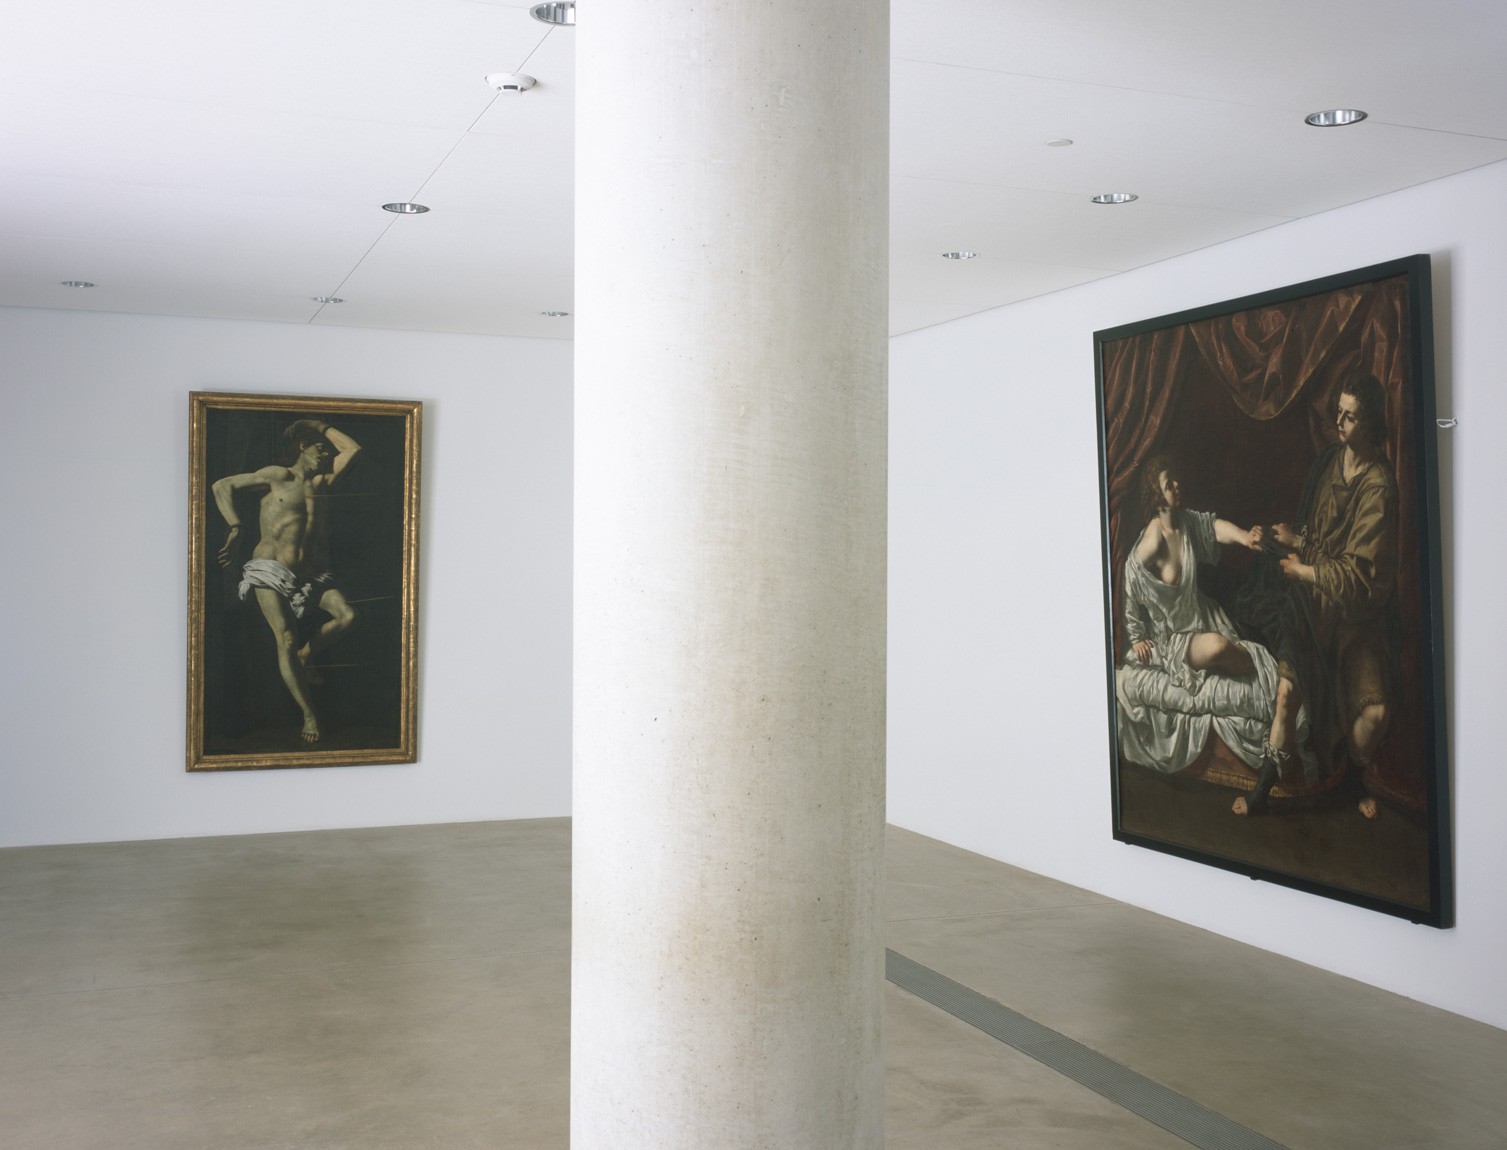 In the Entrance Gallery, two paintings are on view on opposite sides of a column: Giovanni Battista Caracciolo's "The Martyrdom of Saint Sebastian" and Paolo Domenico Finoglia's "Joseph and Potiphar's Wife."